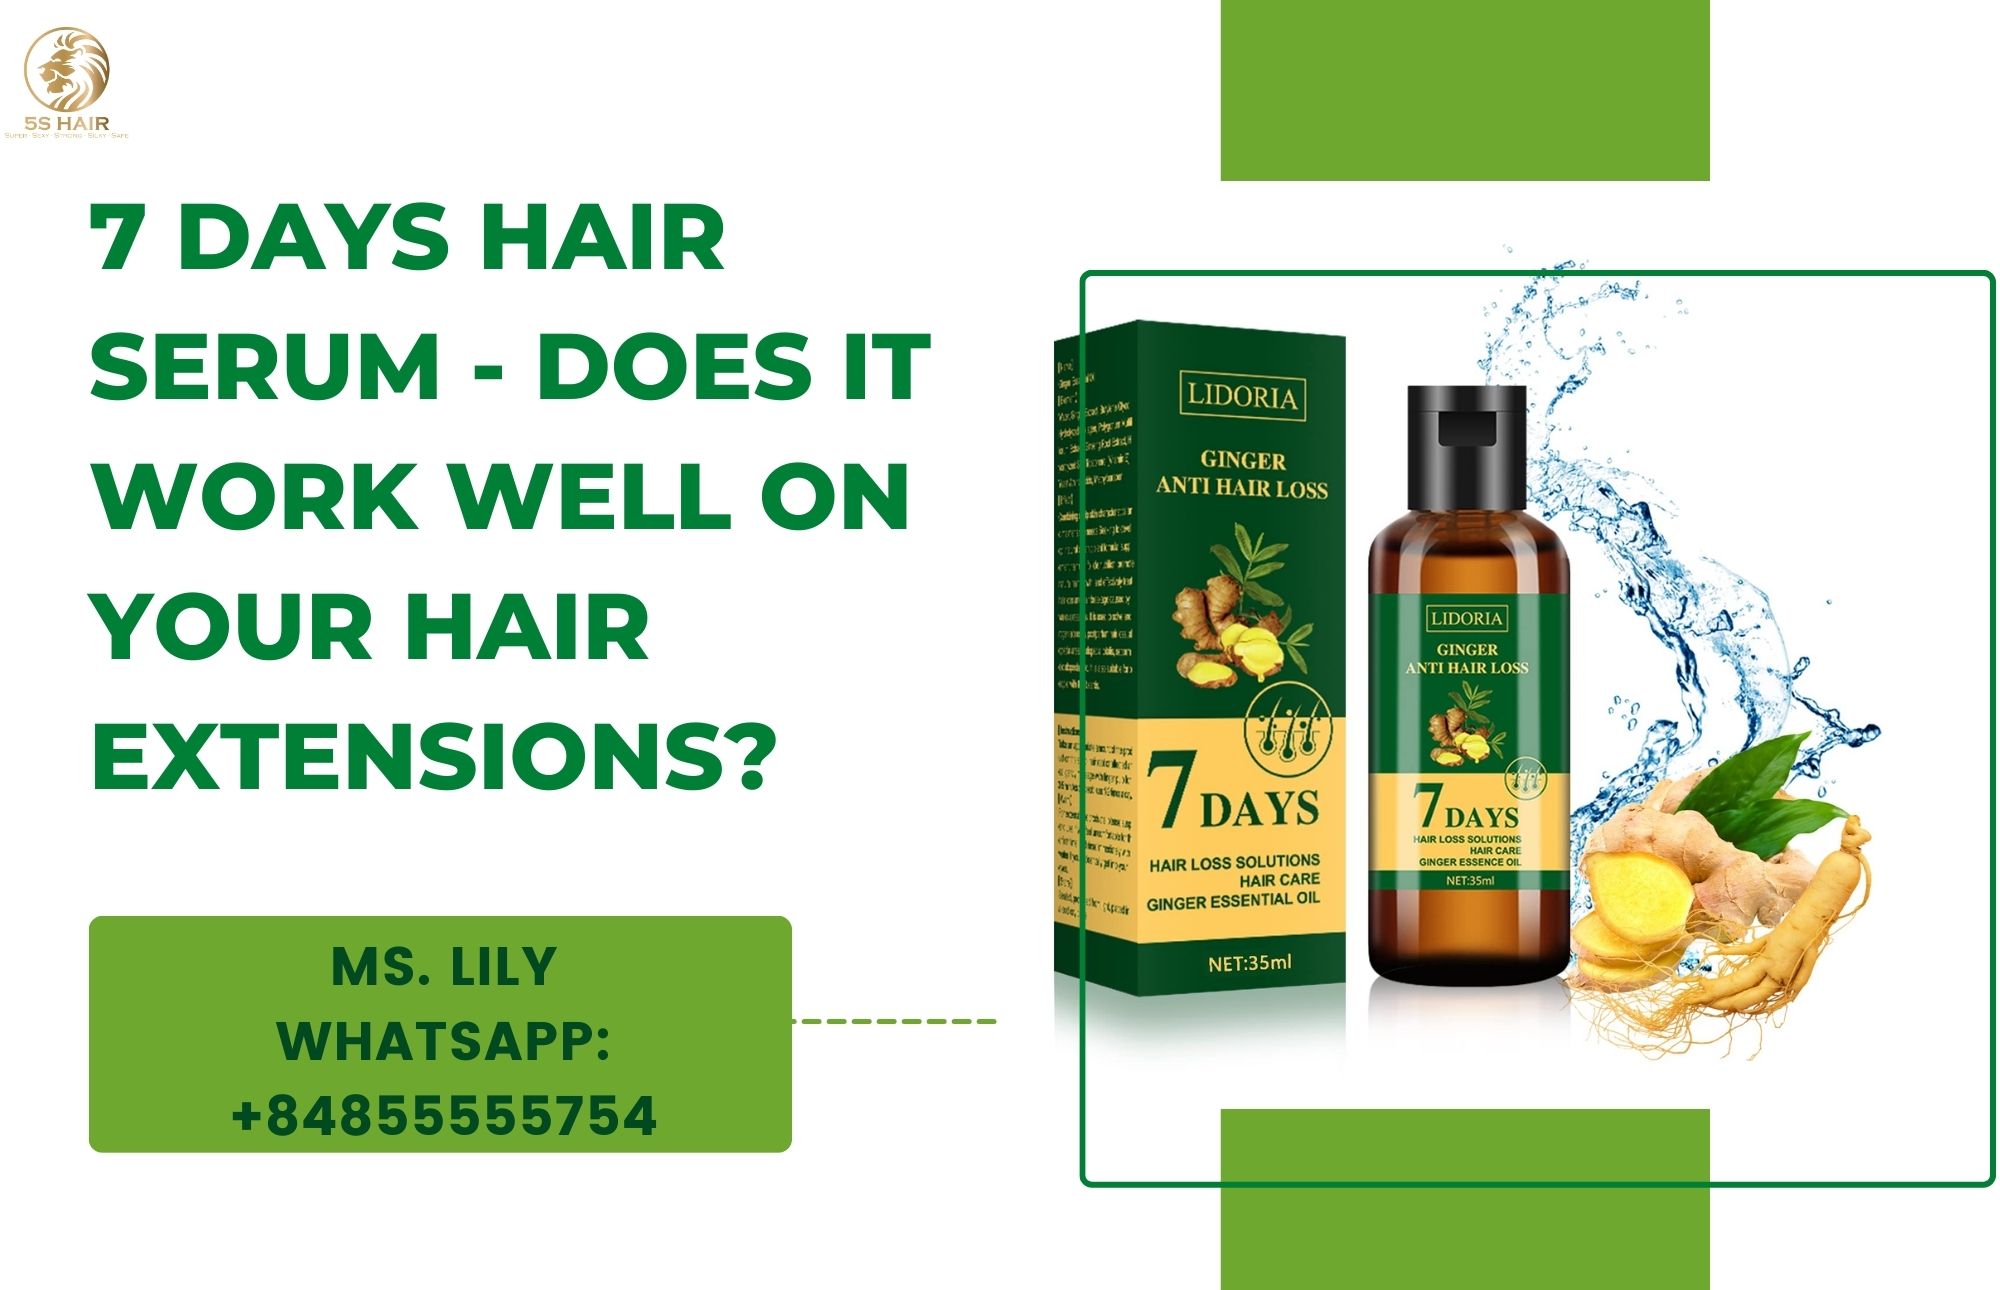 7-days-hair-serum-does-it-work-well-on-your-hair-extensions